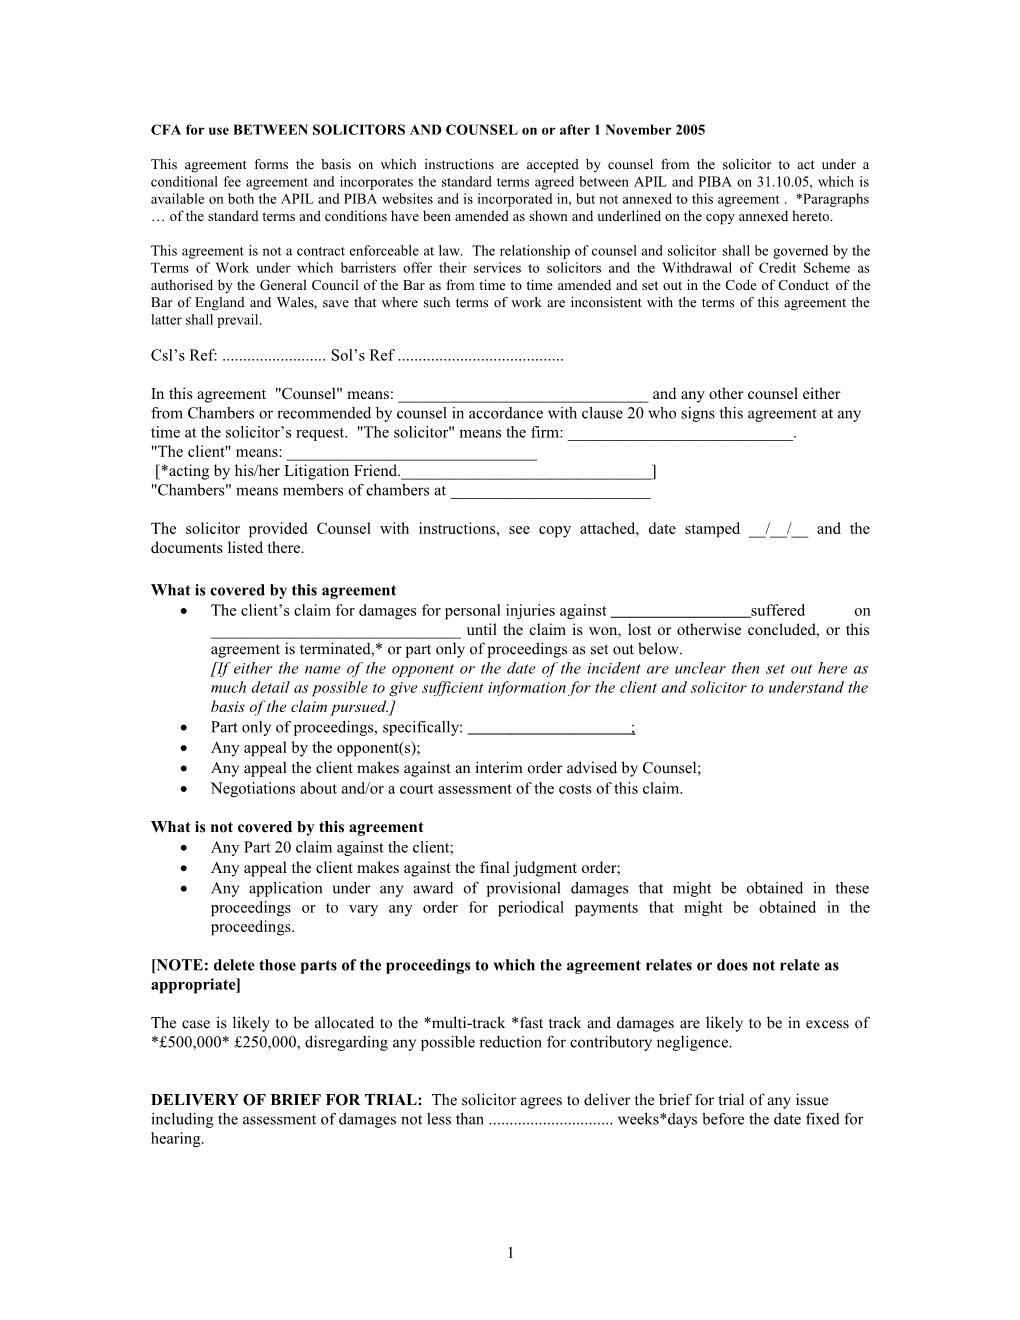 CFA for Use BETWEEN SOLICITORS and COUNSEL on Or After 1 November 2005